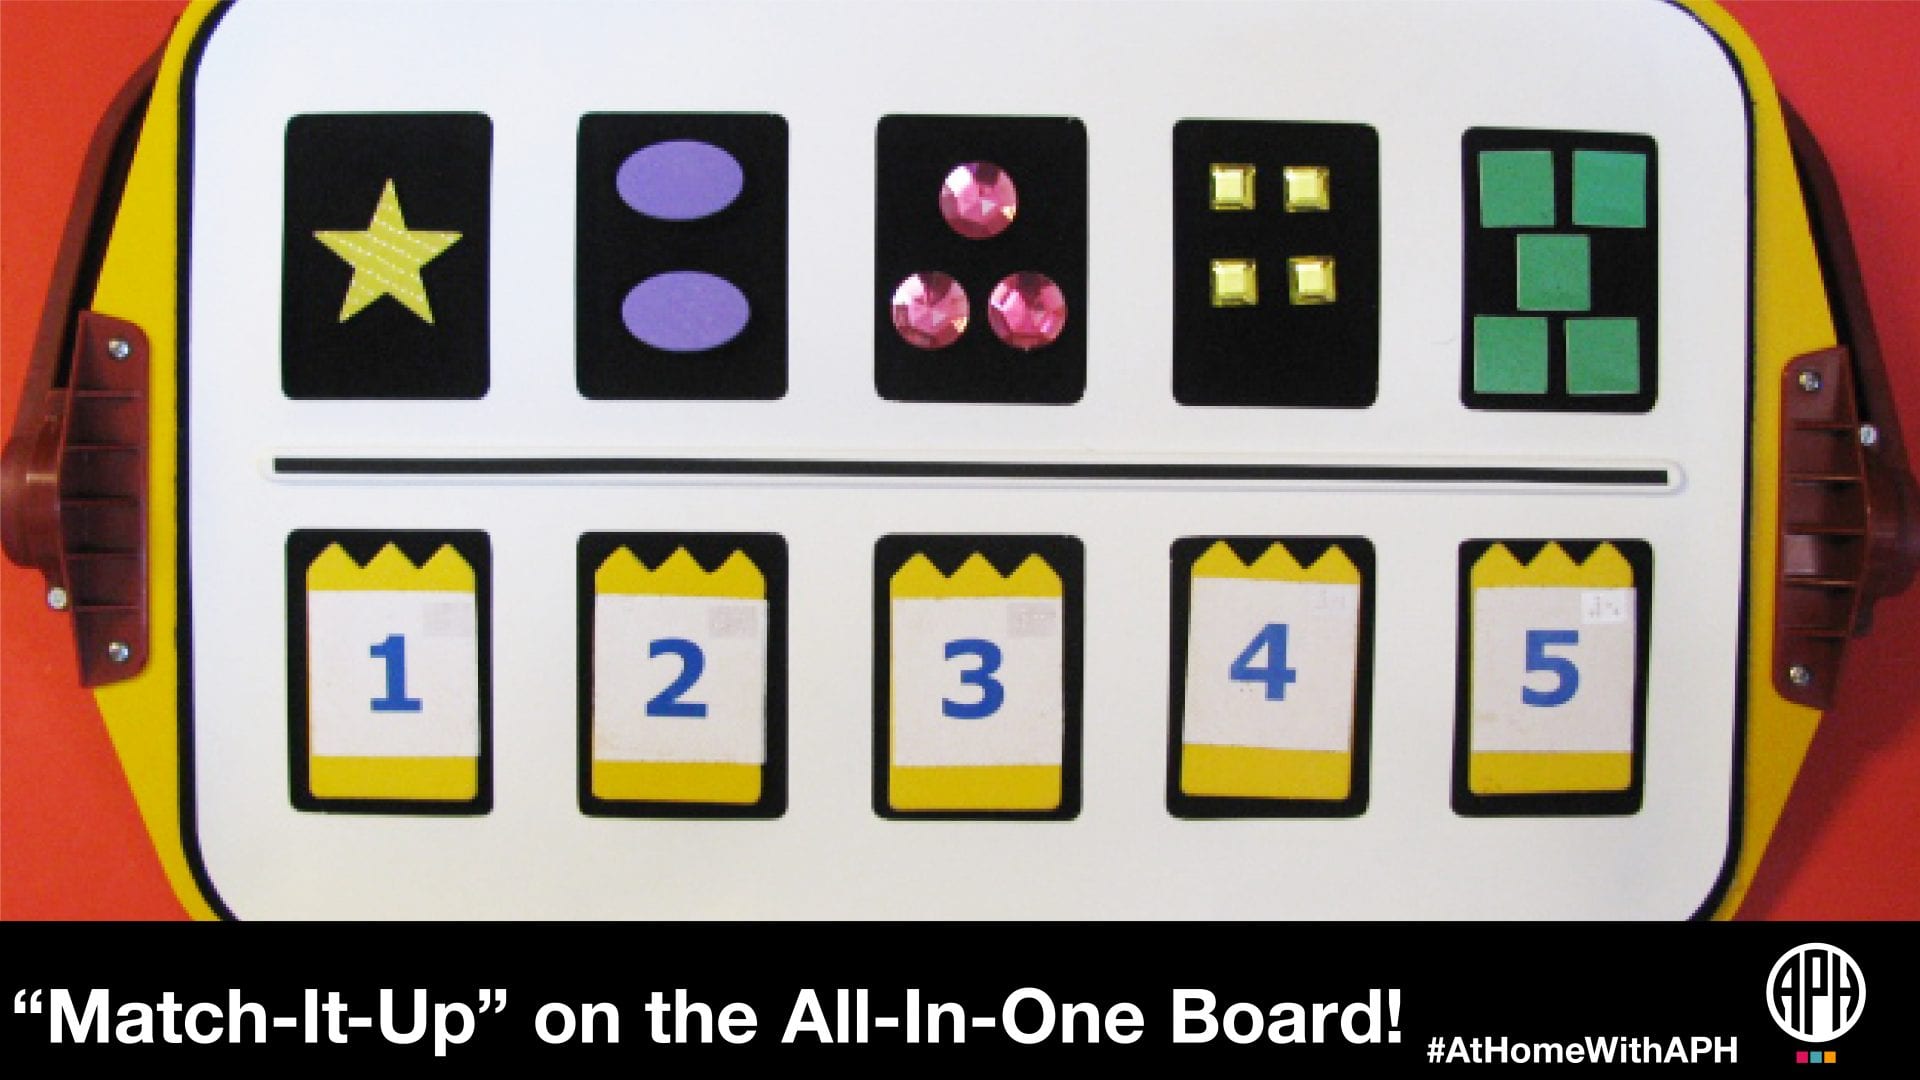 image of an all-in-one board with match-it-up pieces on it "Match-It-Up" on the All-In-One Board #AtHomeWithAPH"